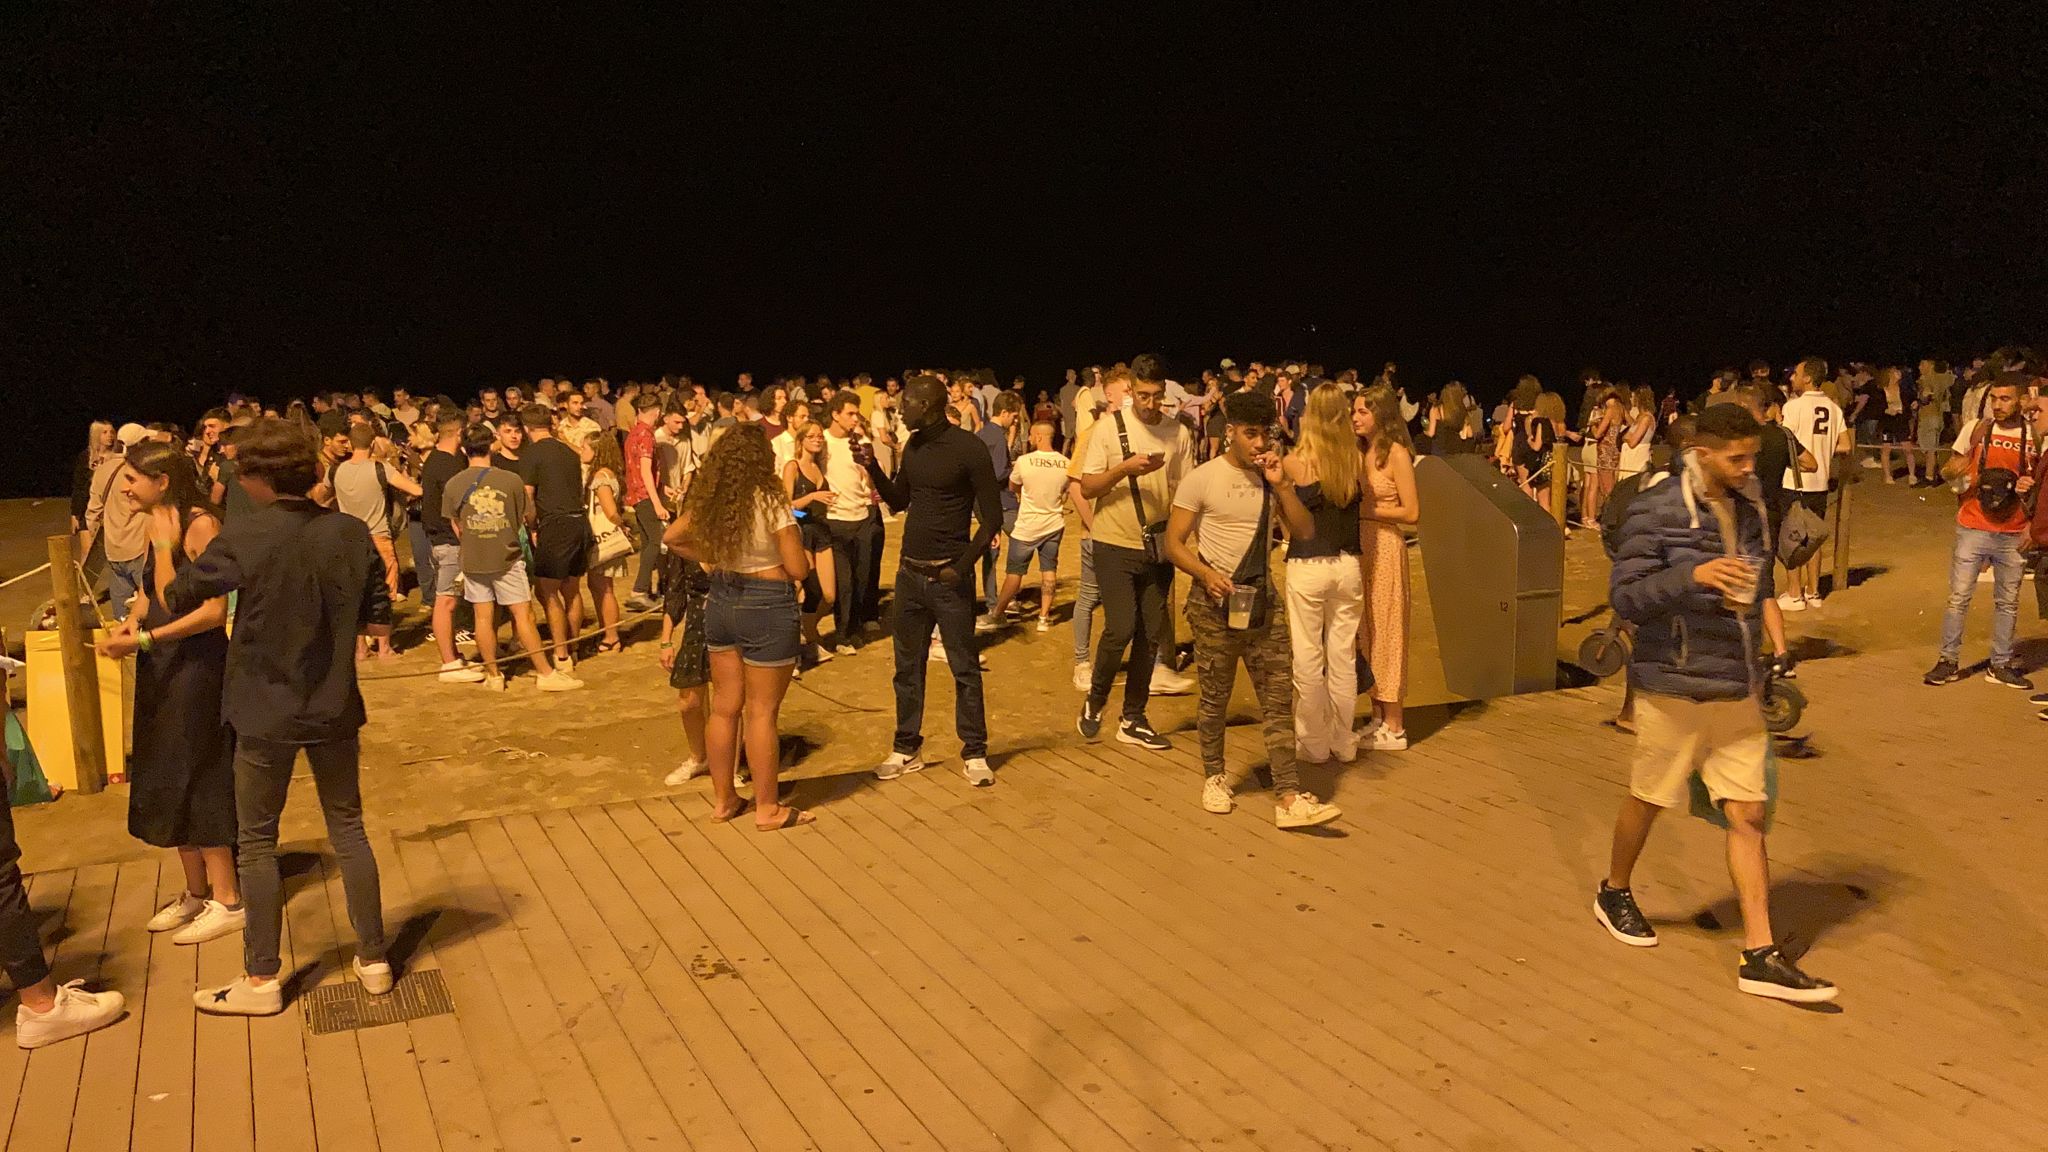 Revelers partying on Barcelona's beach at 1 am when curfew came into force on June 17, 2021 (by Guifré Jordan)